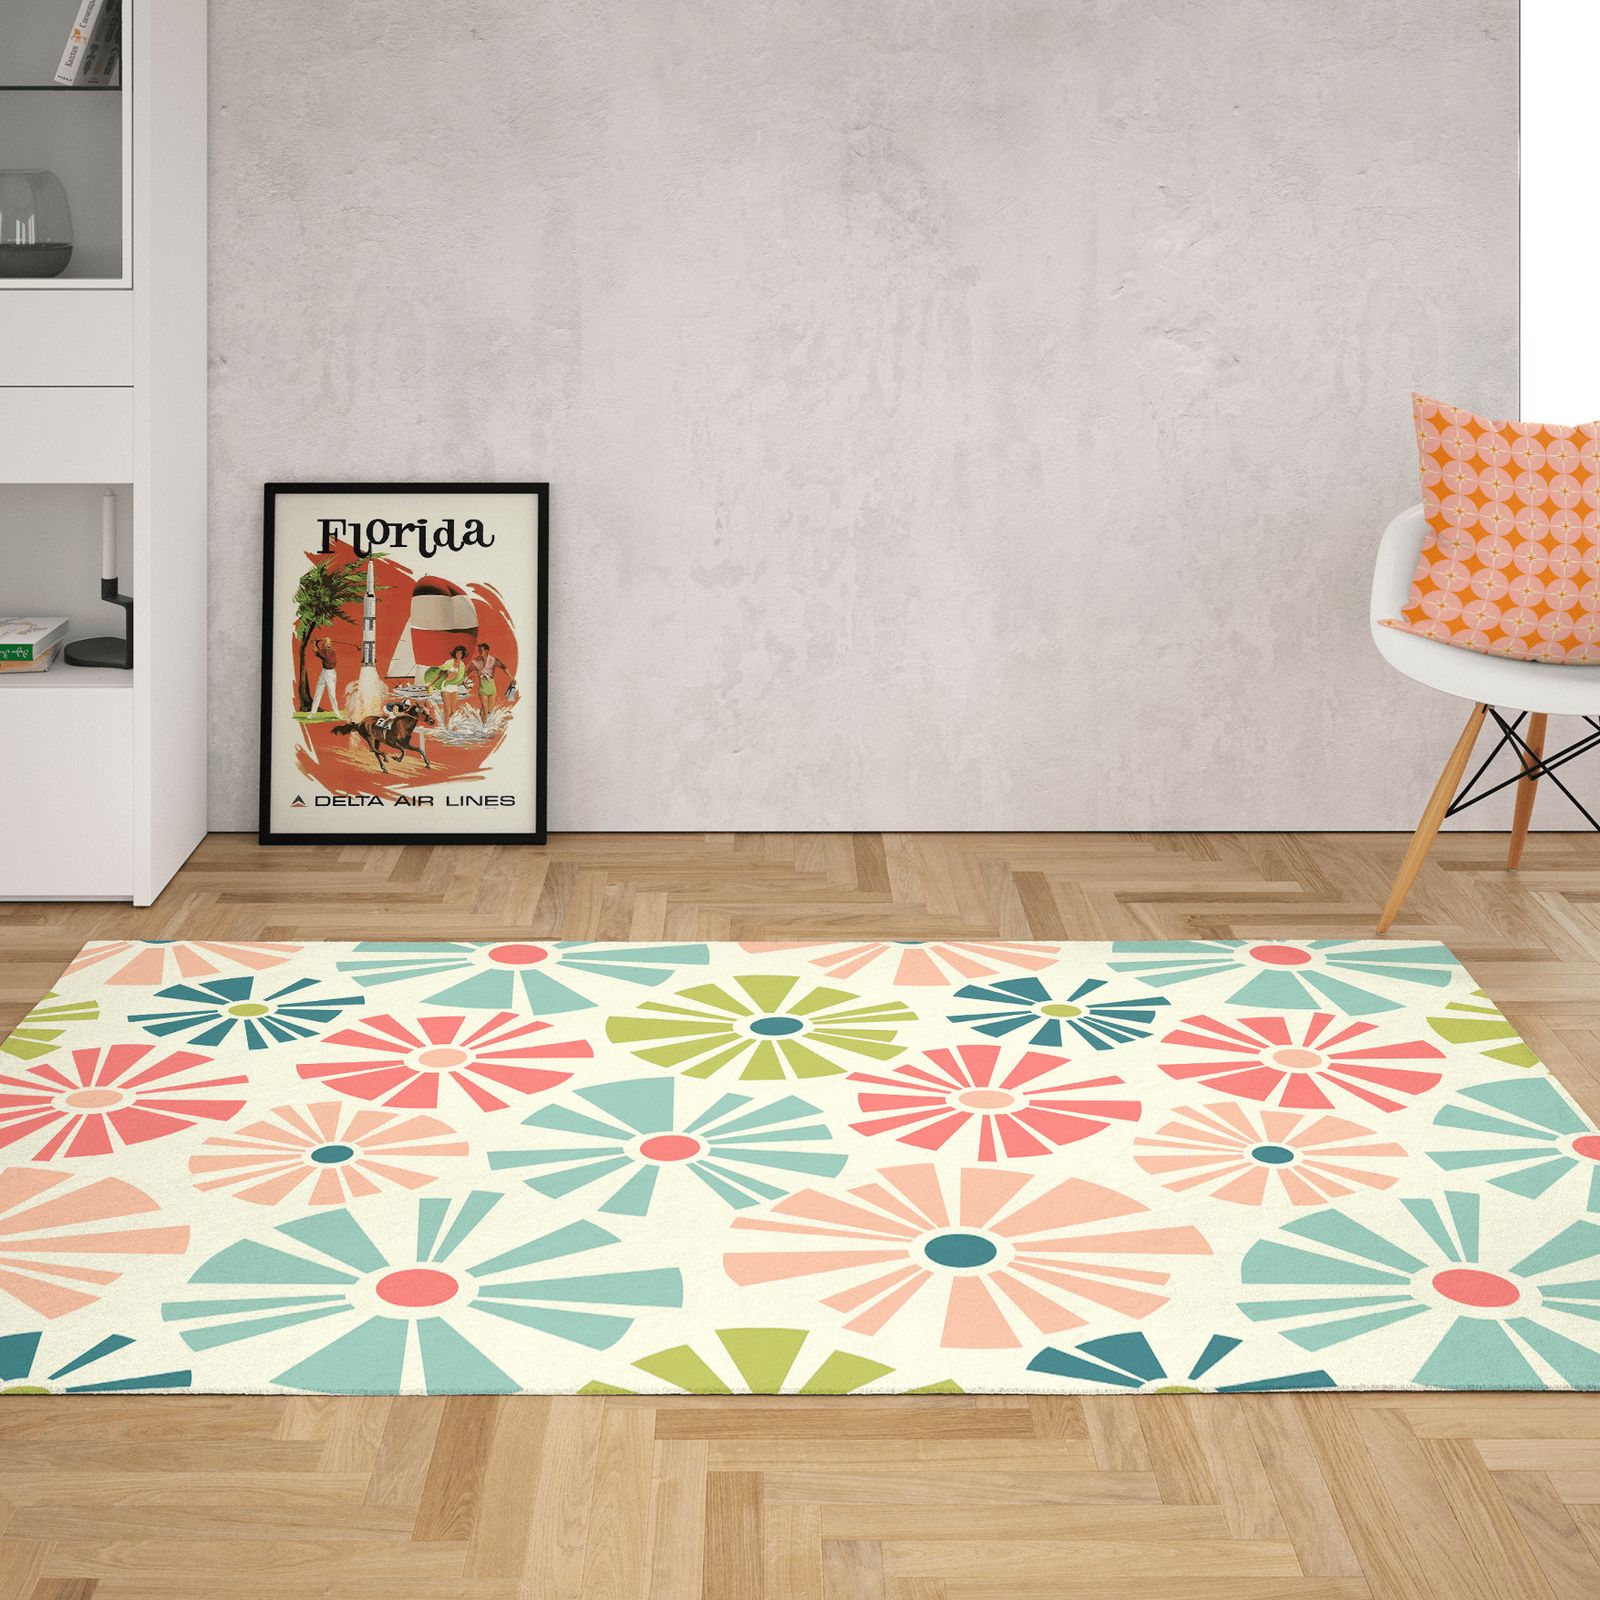 Retro Coral Olive Aqua Teal Pink Beige Mod Groovy Floral Area Rug | Ebay Throughout Pink And Aqua Rugs (View 11 of 15)